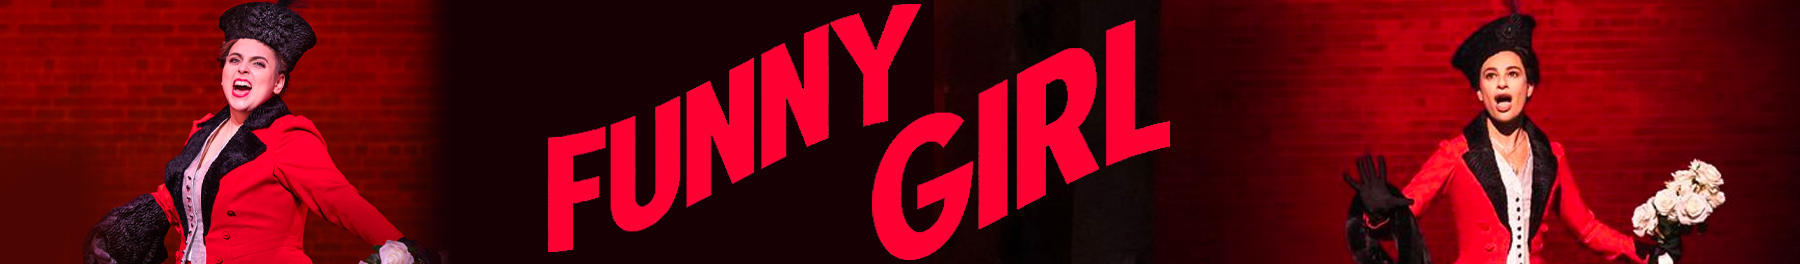 Funny Girl Broadway Show